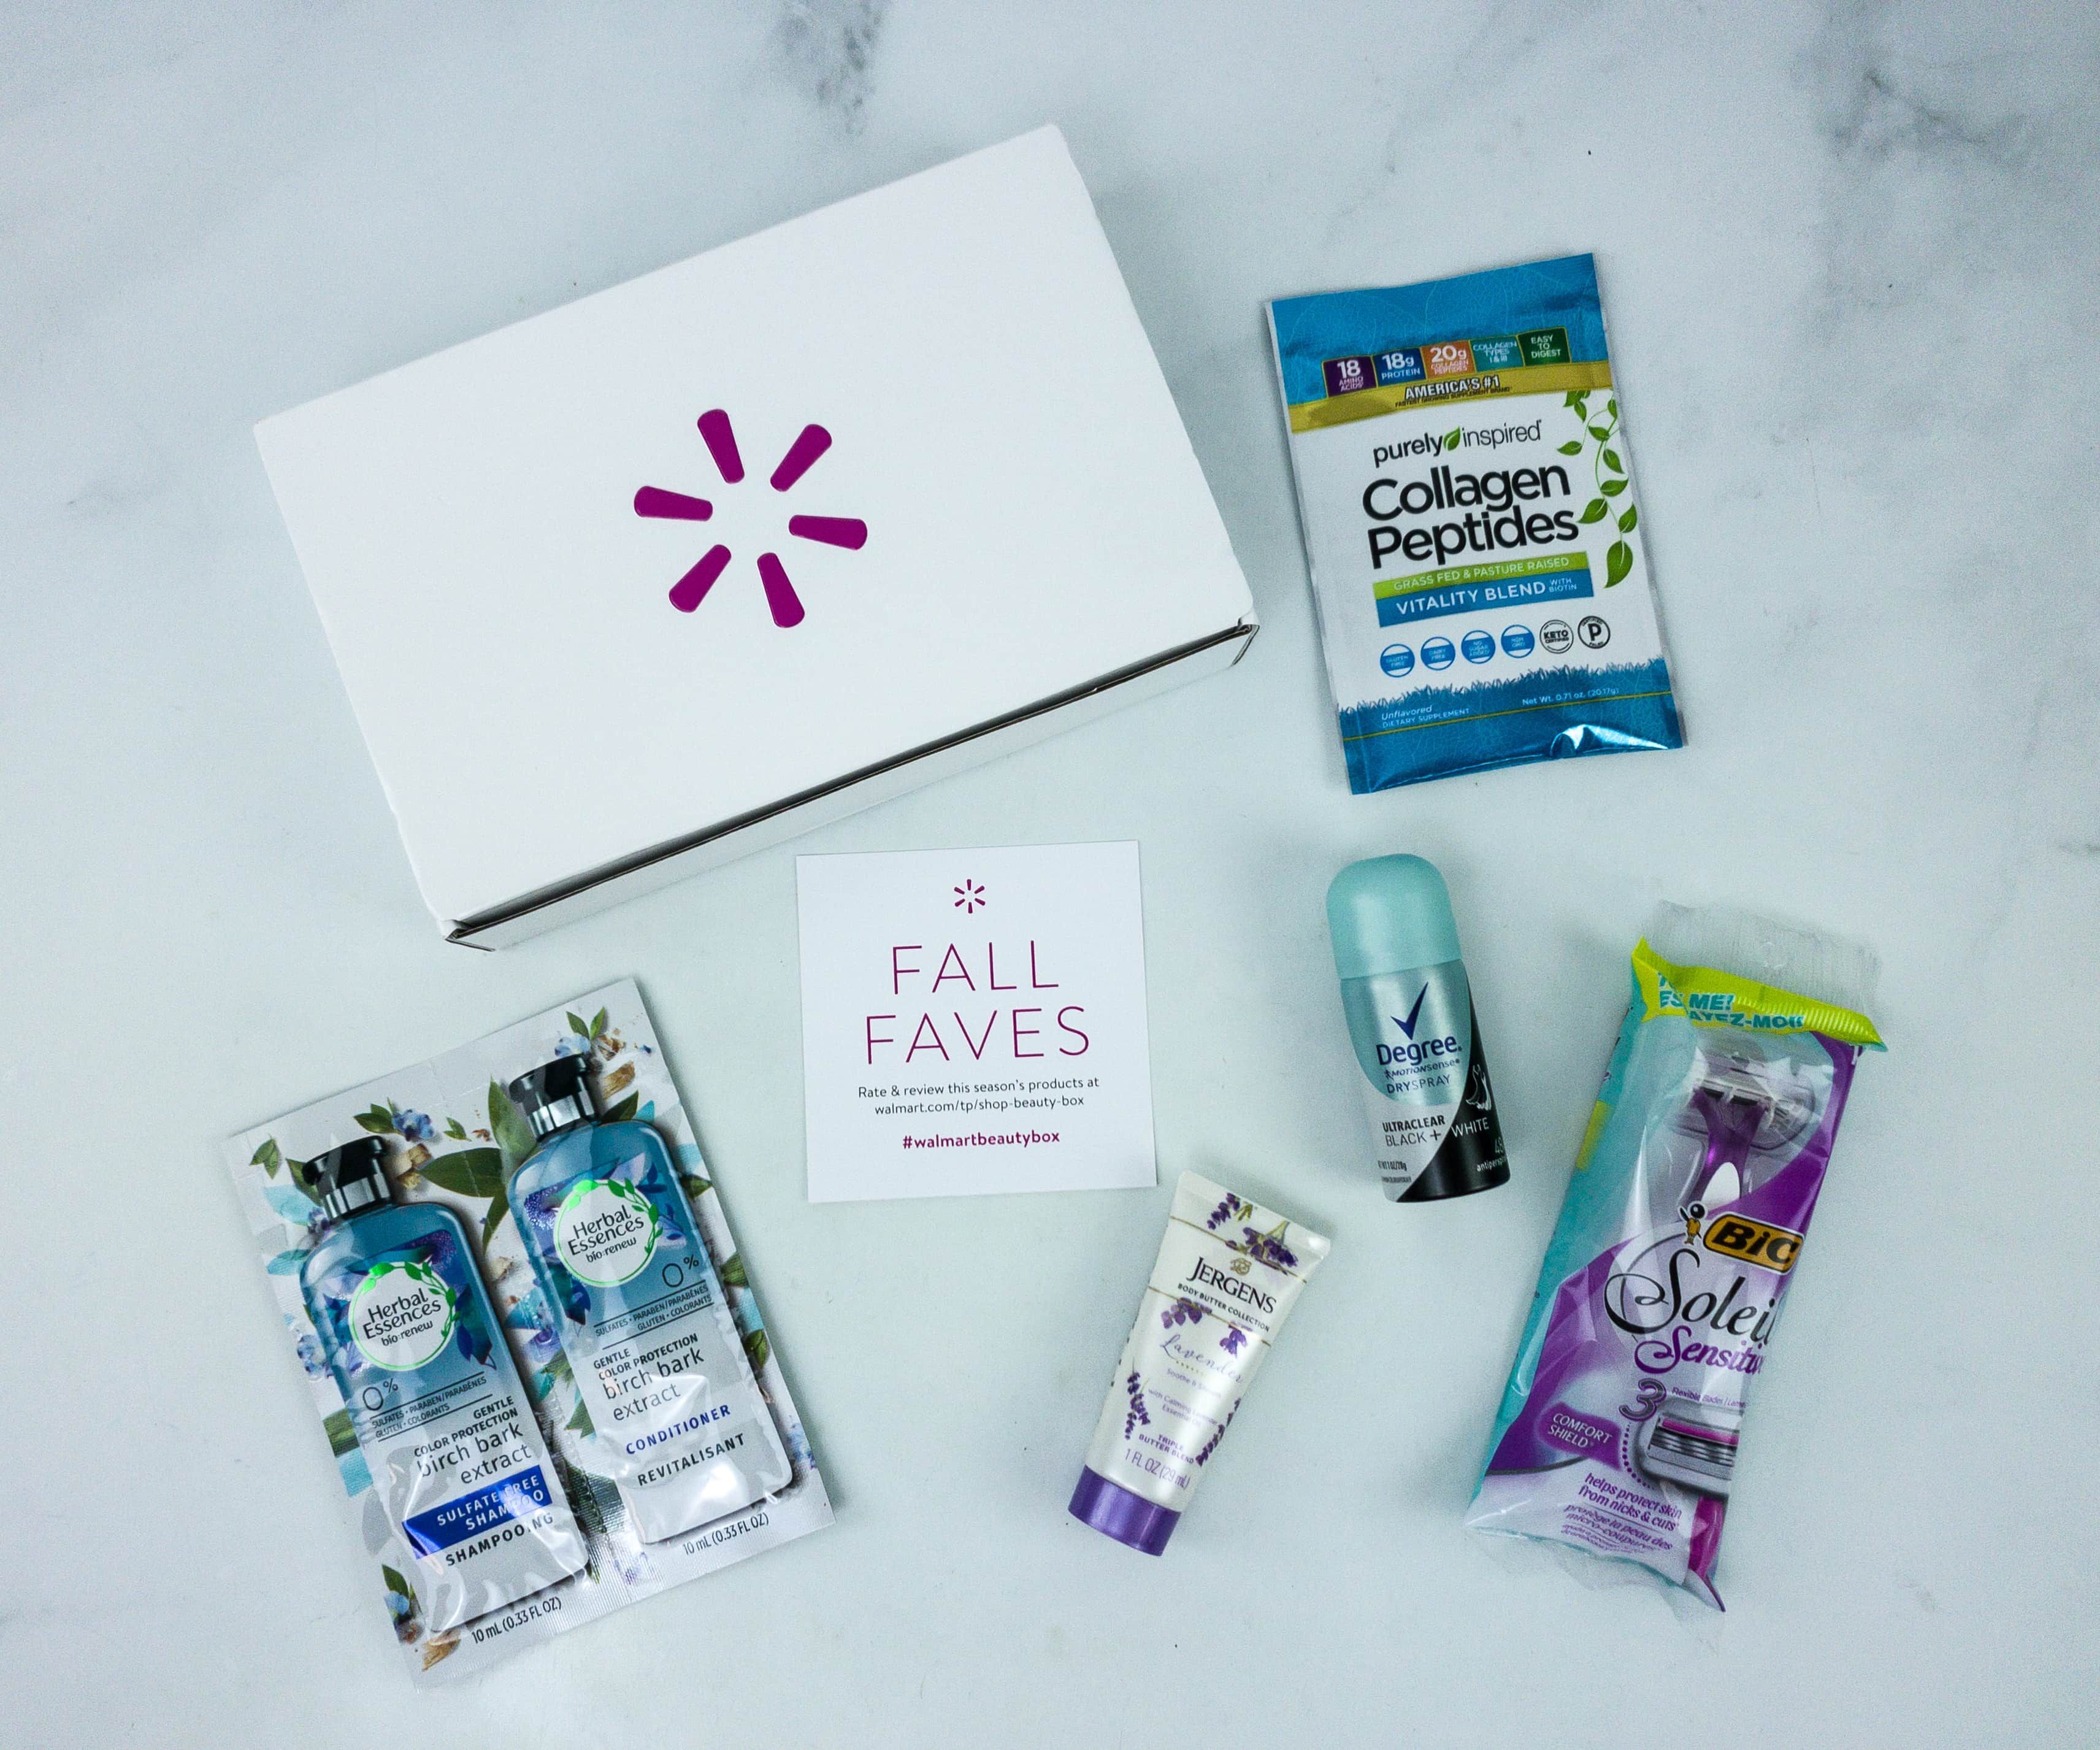 17 beauty Box monthly ideas